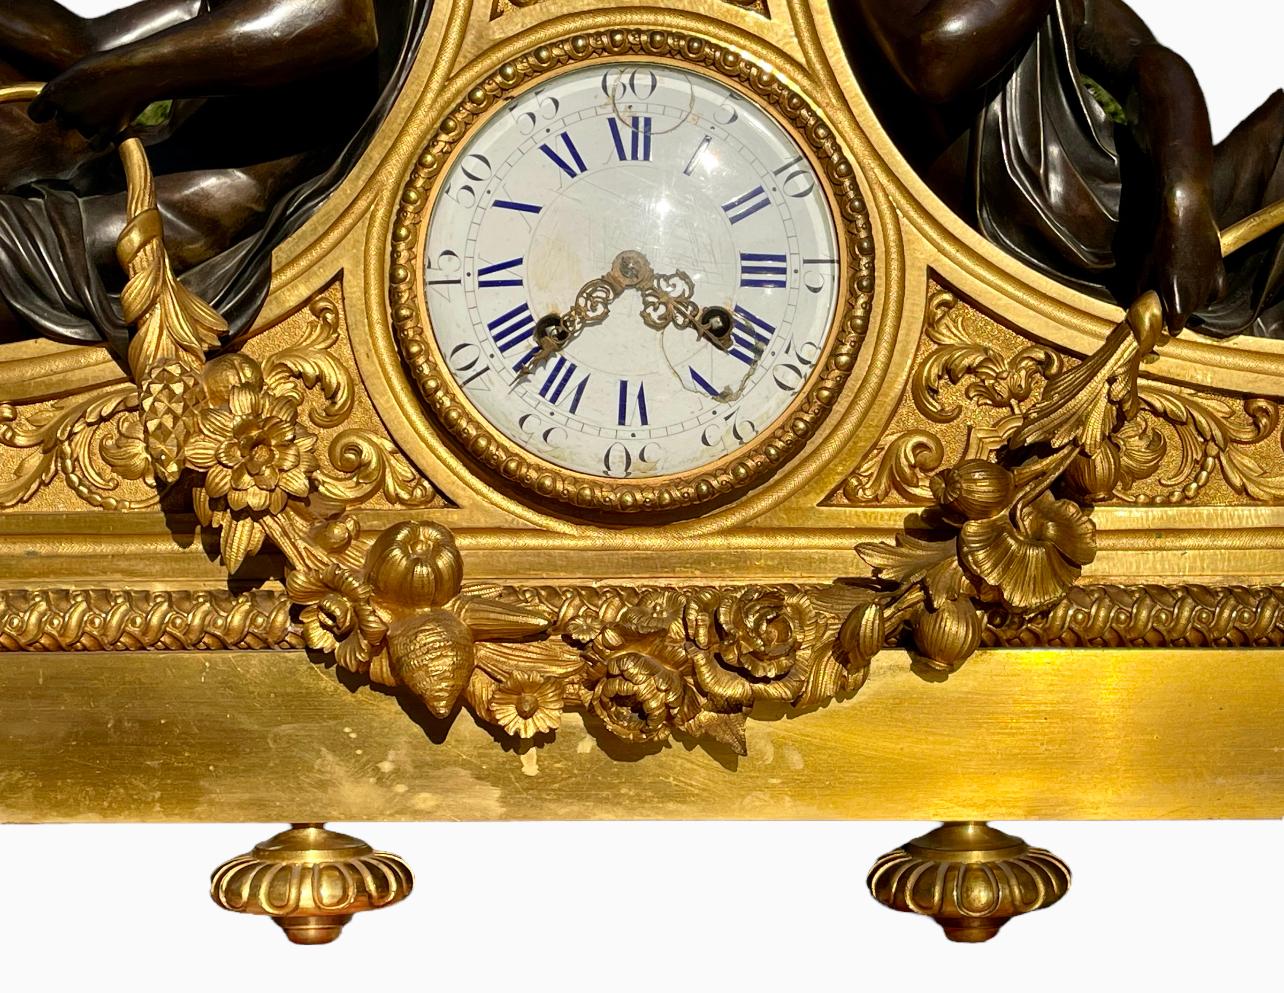 Large clock in gilded and patinated bronze from the Napoleon III period dating from the 19th century. This clock is of very high quality, complete and in very good condition.

Dimensions
Height 60cm
Width 80cm
Depth 18cm